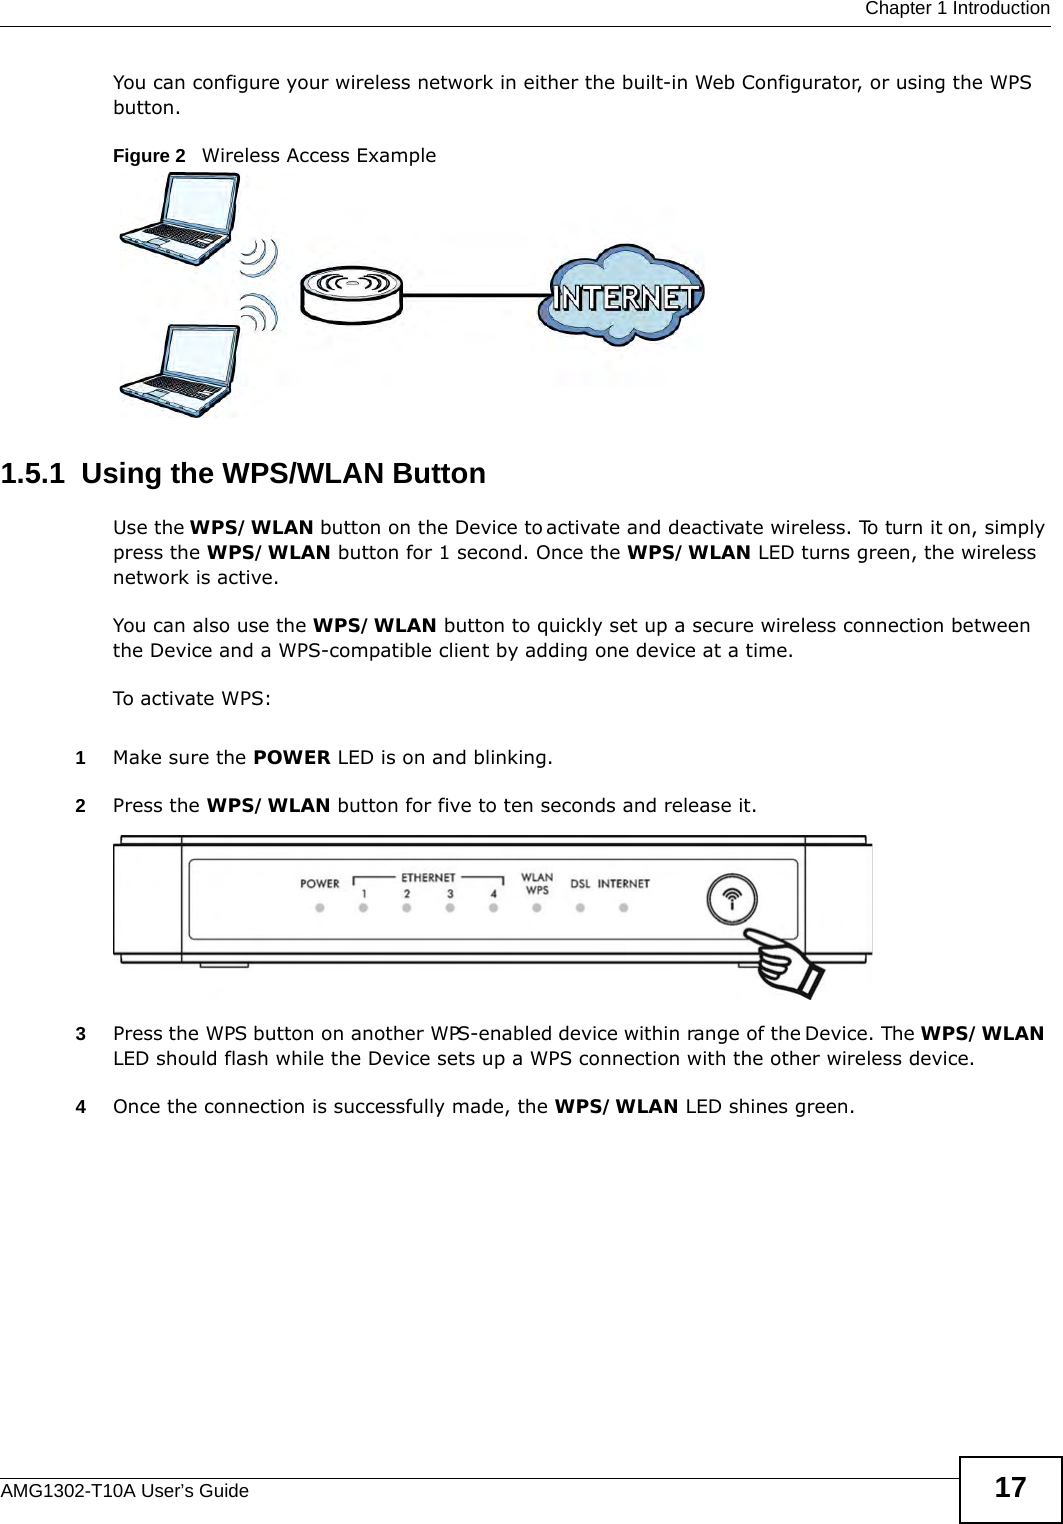  Chapter 1 IntroductionAMG1302-T10A User’s Guide 17You can configure your wireless network in either the built-in Web Configurator, or using the WPS button.Figure 2   Wireless Access Example1.5.1  Using the WPS/WLAN ButtonUse the WPS/WLAN button on the Device to activate and deactivate wireless. To turn it on, simply press the WPS/WLAN button for 1 second. Once the WPS/WLAN LED turns green, the wireless network is active.You can also use the WPS/WLAN button to quickly set up a secure wireless connection between the Device and a WPS-compatible client by adding one device at a time.To activate WPS:1Make sure the POWER LED is on and blinking.2Press the WPS/WLAN button for five to ten seconds and release it. 3Press the WPS button on another WPS-enabled device within range of the Device. The WPS/WLAN LED should flash while the Device sets up a WPS connection with the other wireless device. 4Once the connection is successfully made, the WPS/WLAN LED shines green.